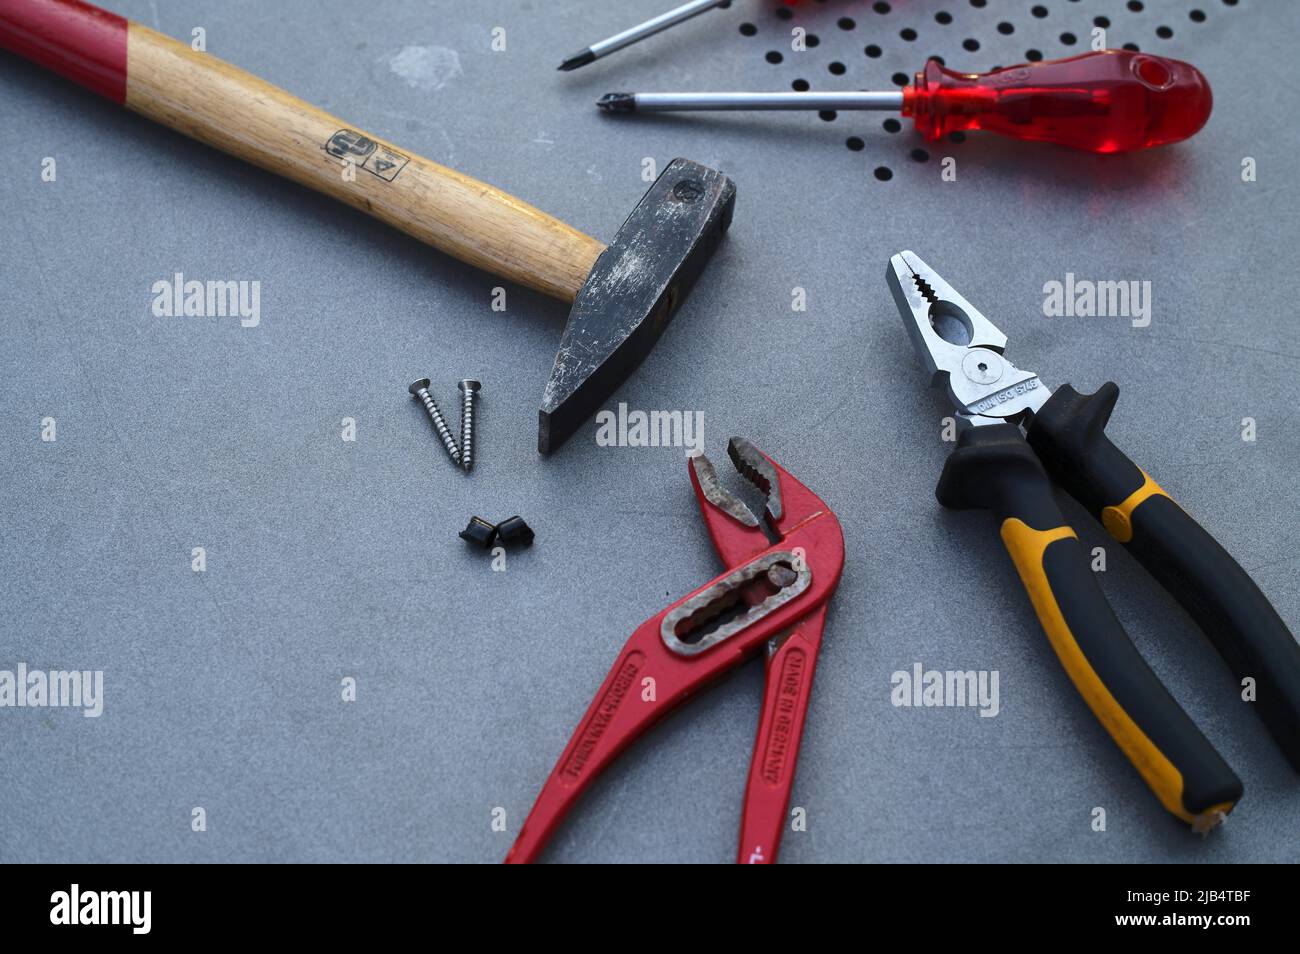 Hammer, screwdriver, pliers, pipe wrench, screws, tools lying on metal table, Baden-Wuerttemberg, Germany Stock Photo